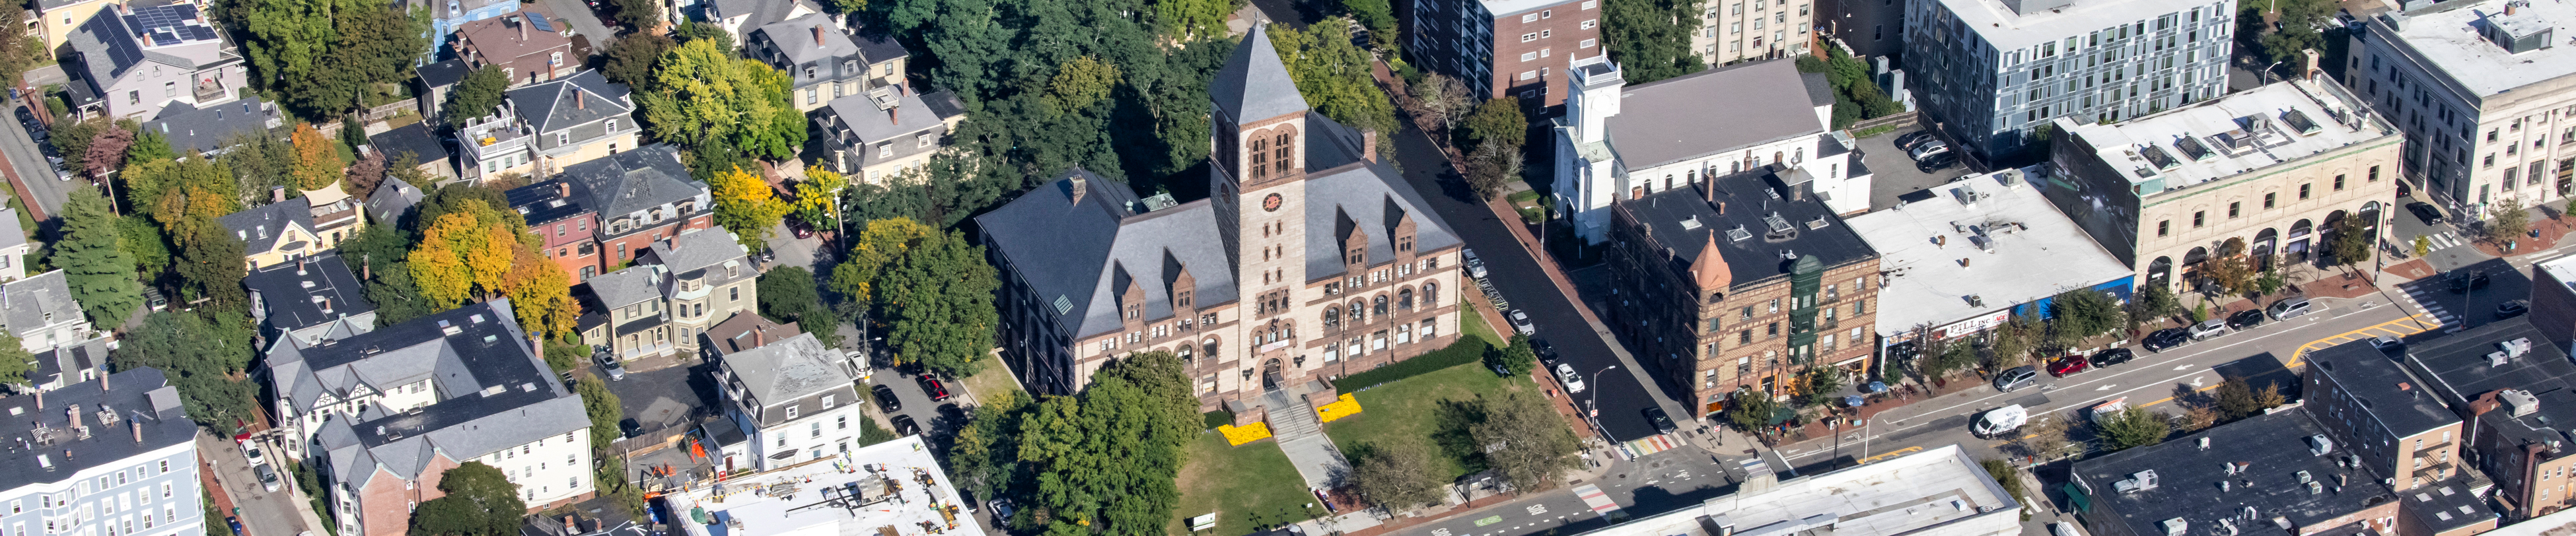 Aerial photo of Cambridge City Hall and the immediate surroundings